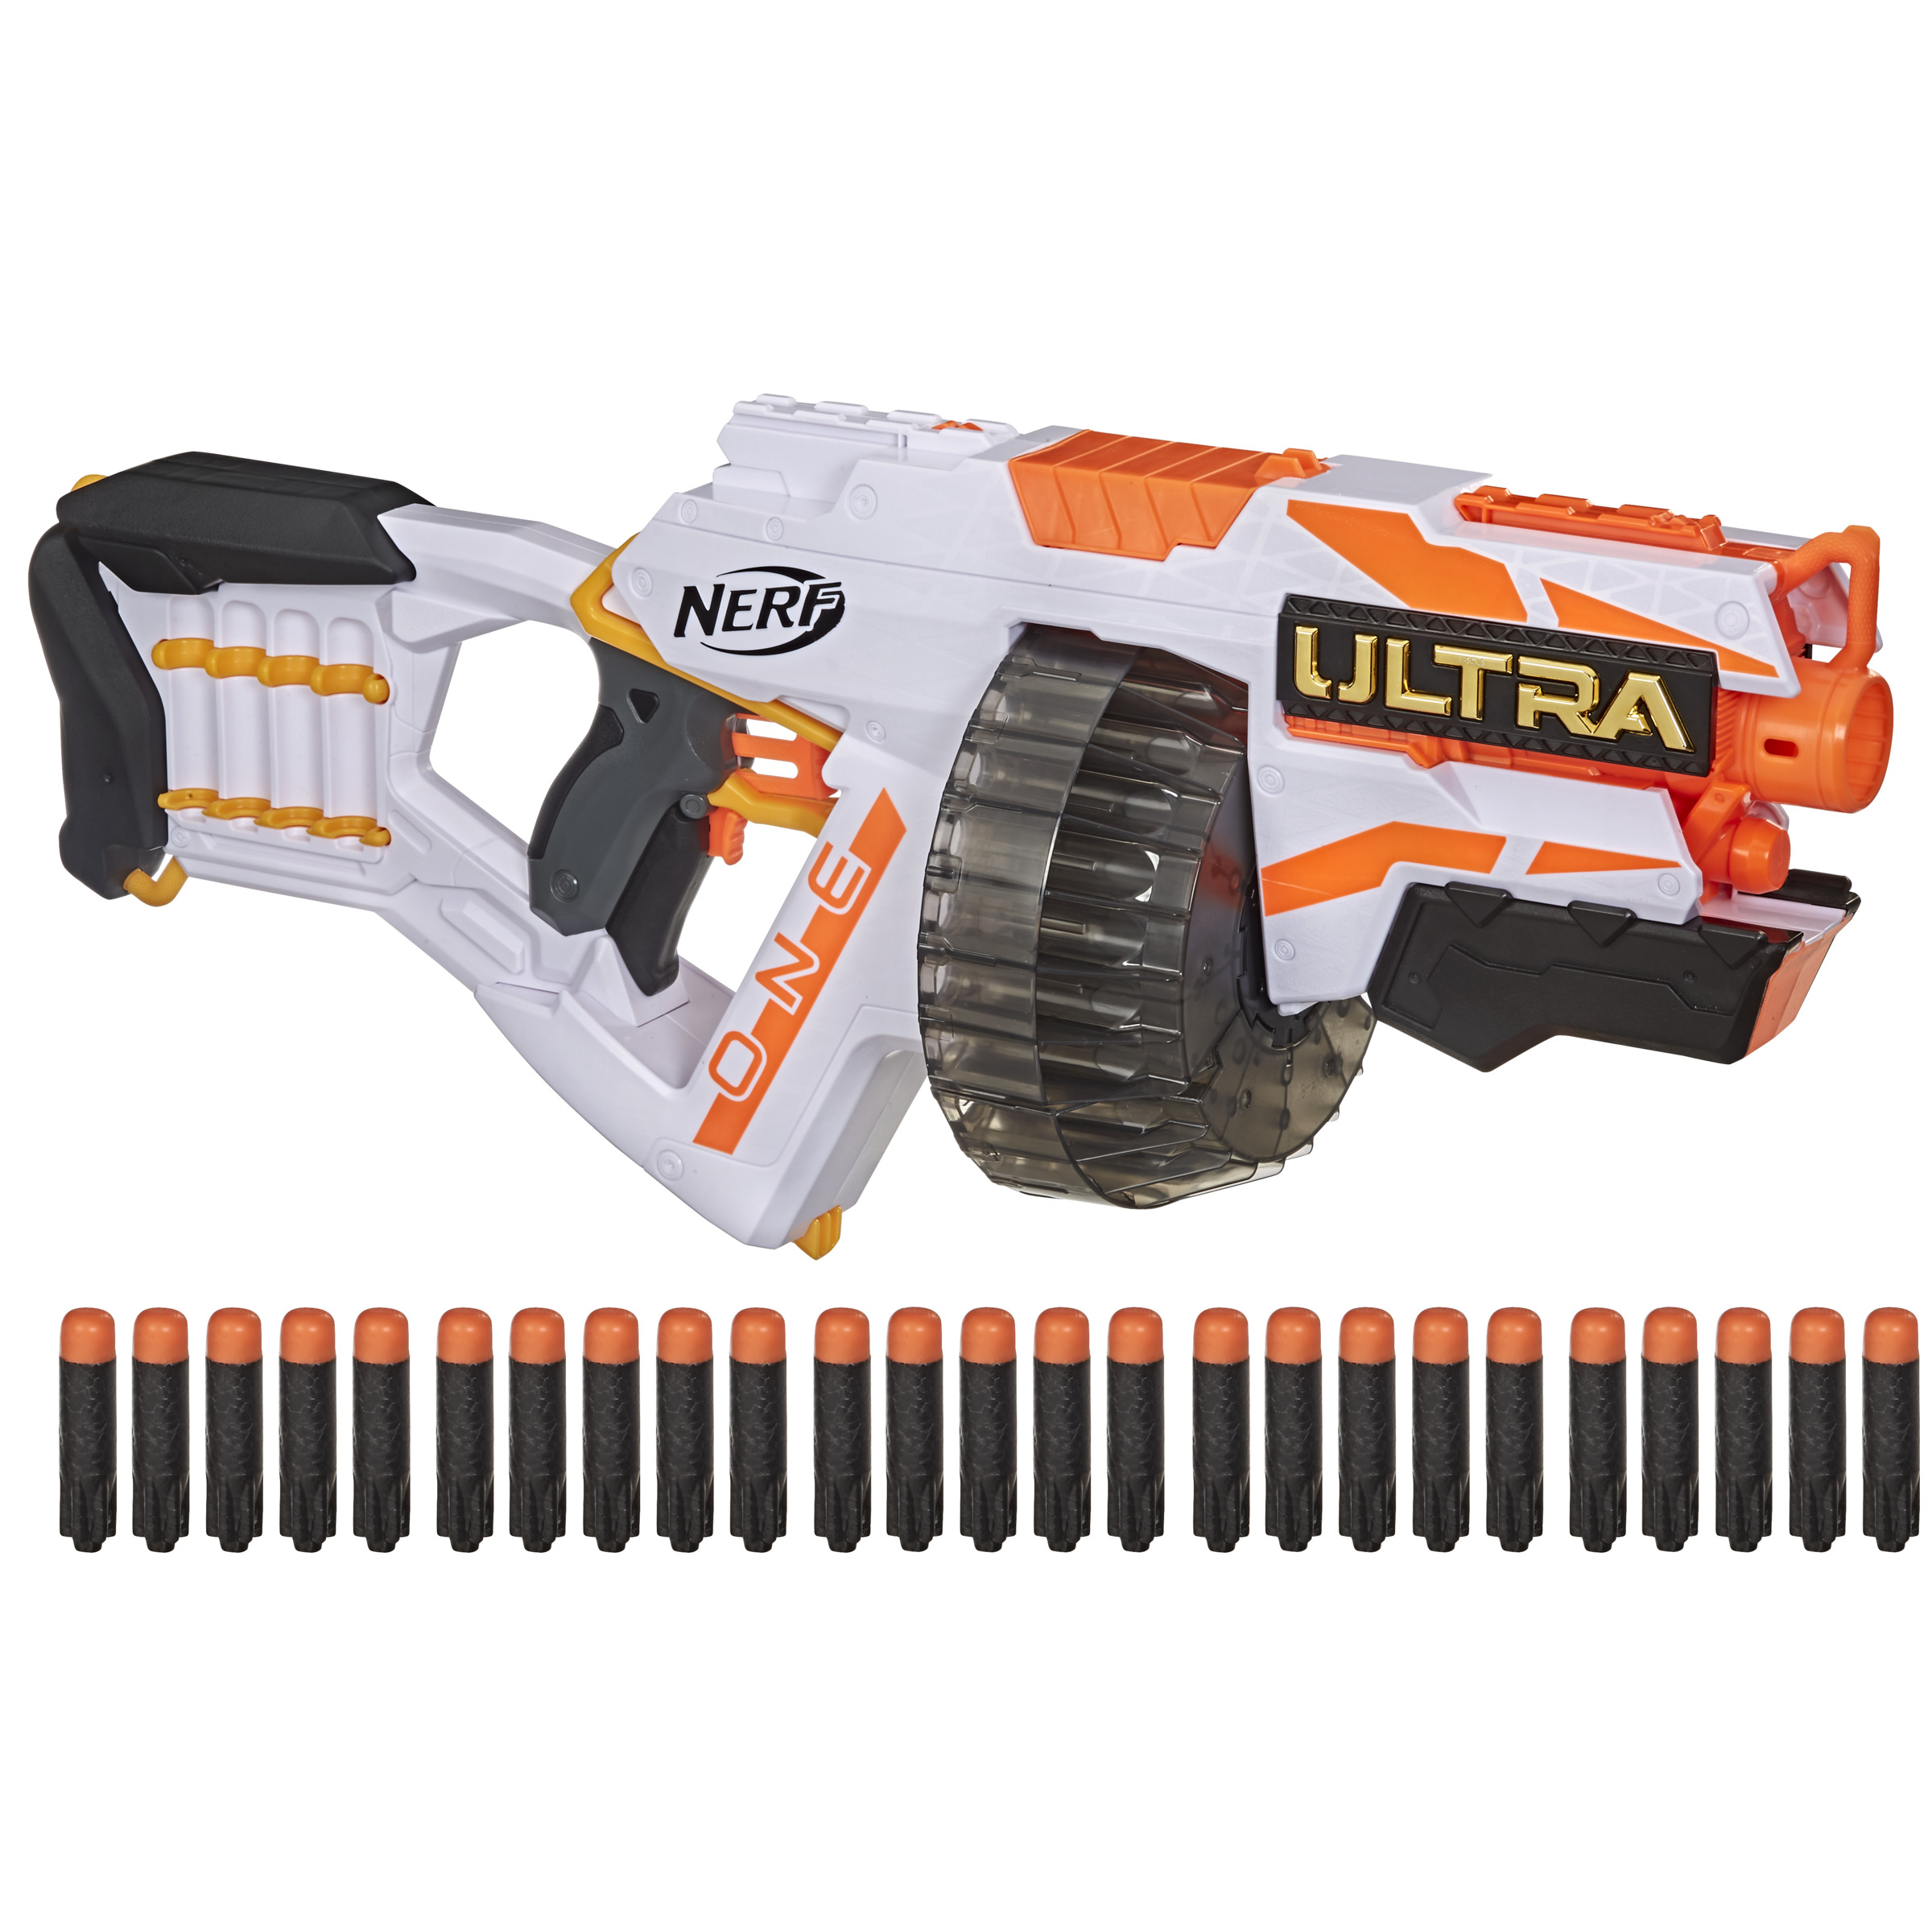 Nerf Ultra One - multicolor - 